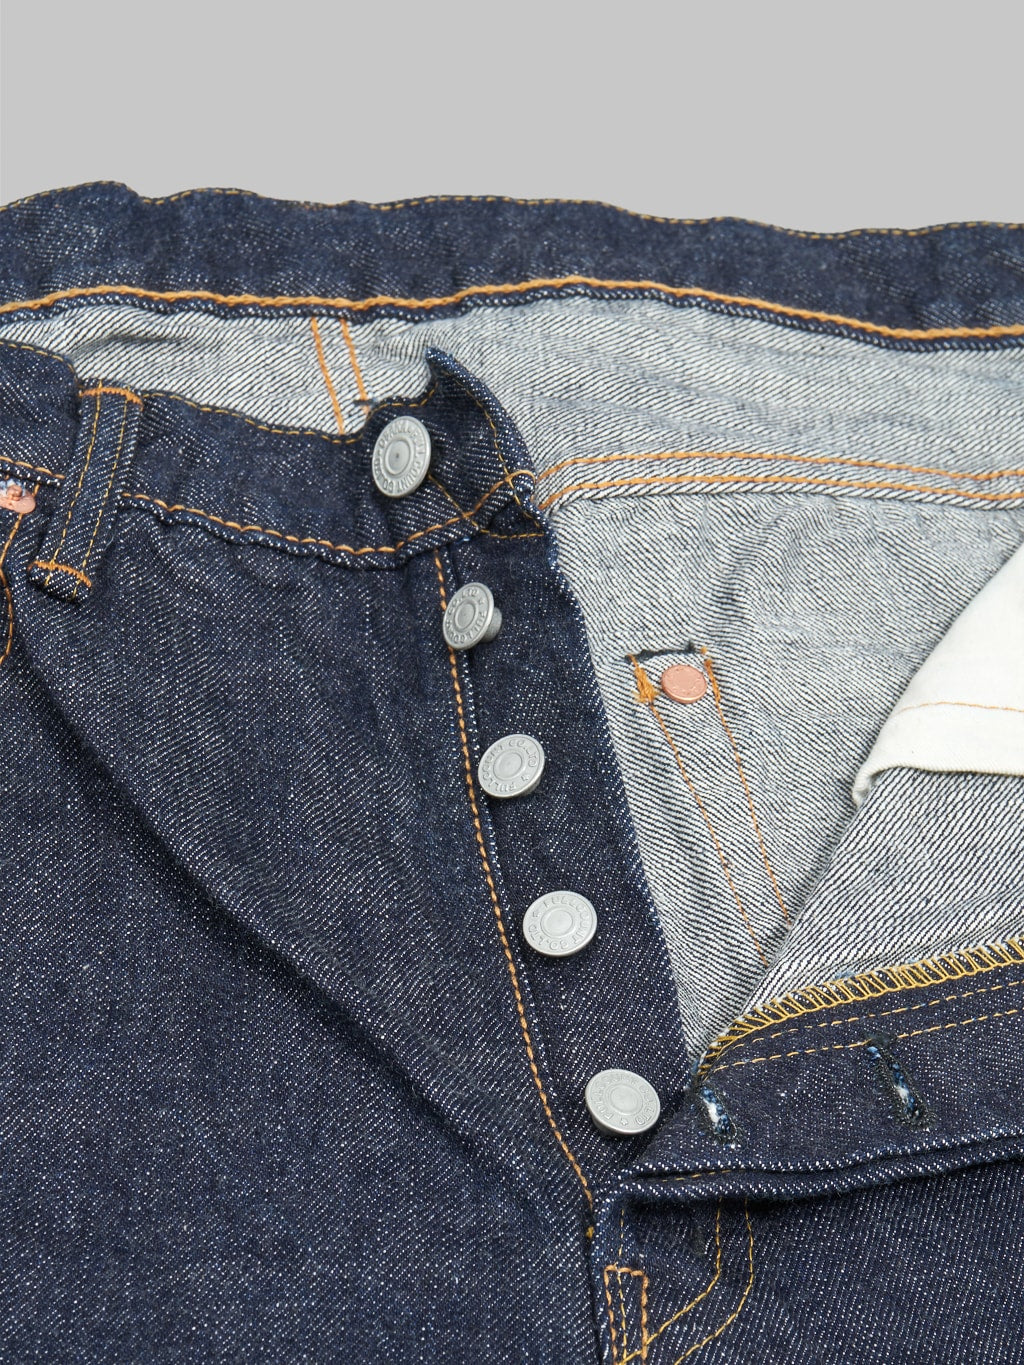 fullcount 1103 clean straight selvedge denim jeans buttons